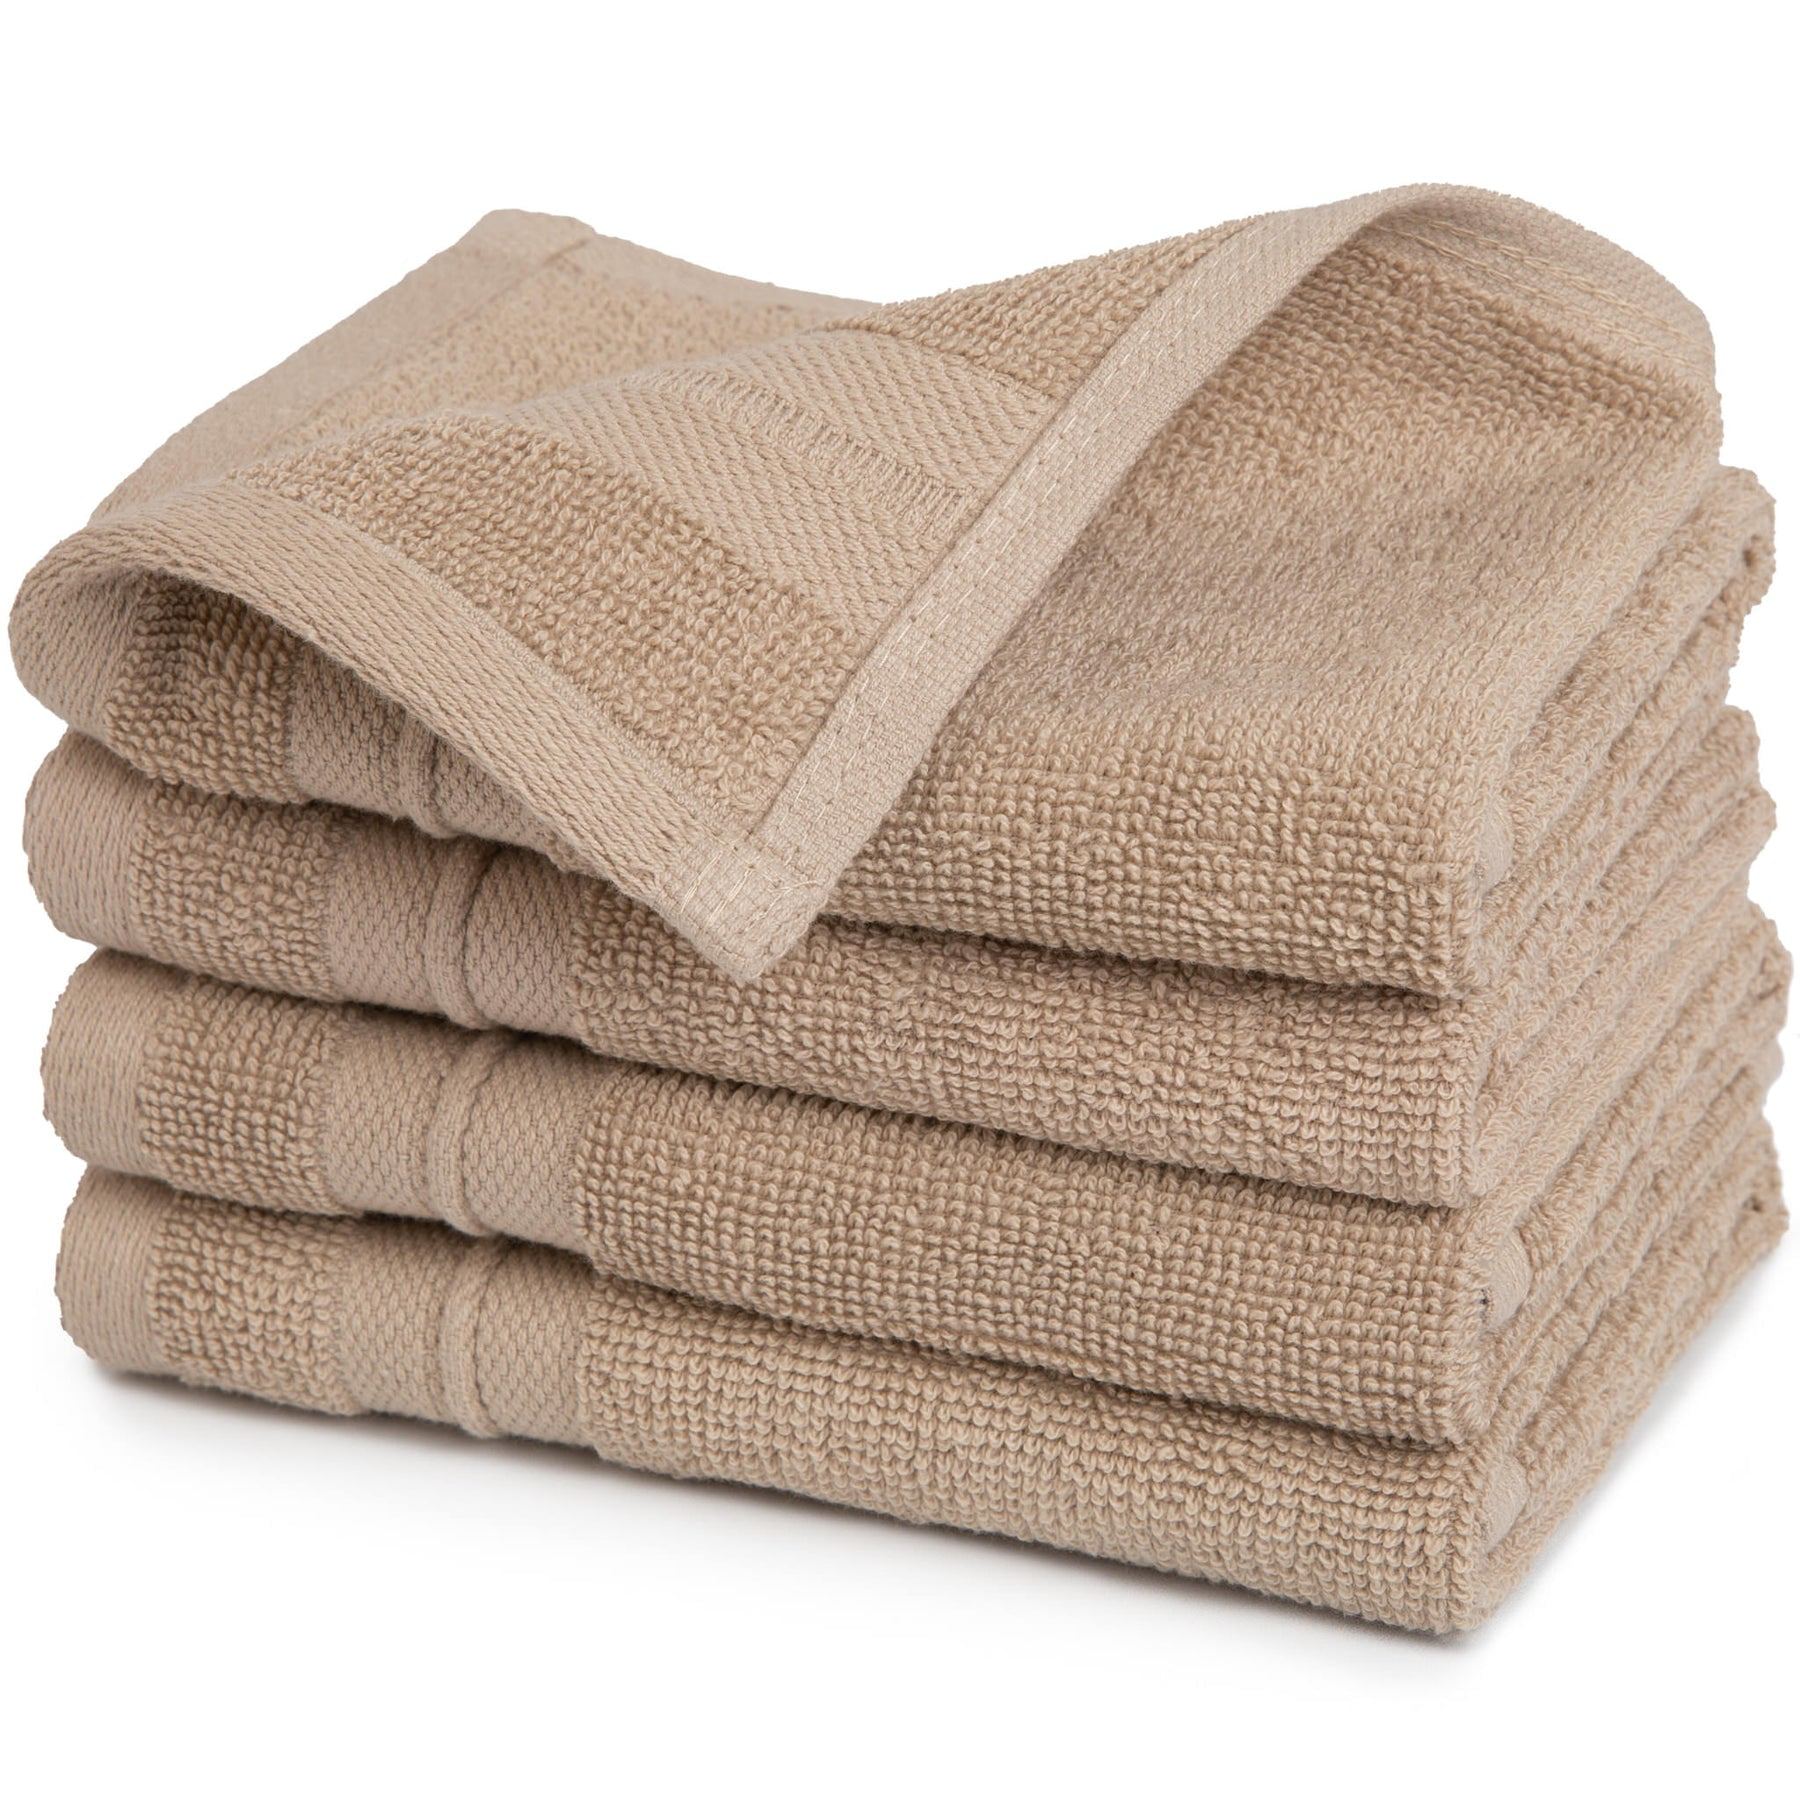 Sticky Toffee Terry Cotton 2 Bath Towels, 2 Hand Towels and 2 Washcloths Bathroom Towel Set of 6, Soft and Absorbent, Tan, Infant Unisex, Size: 6